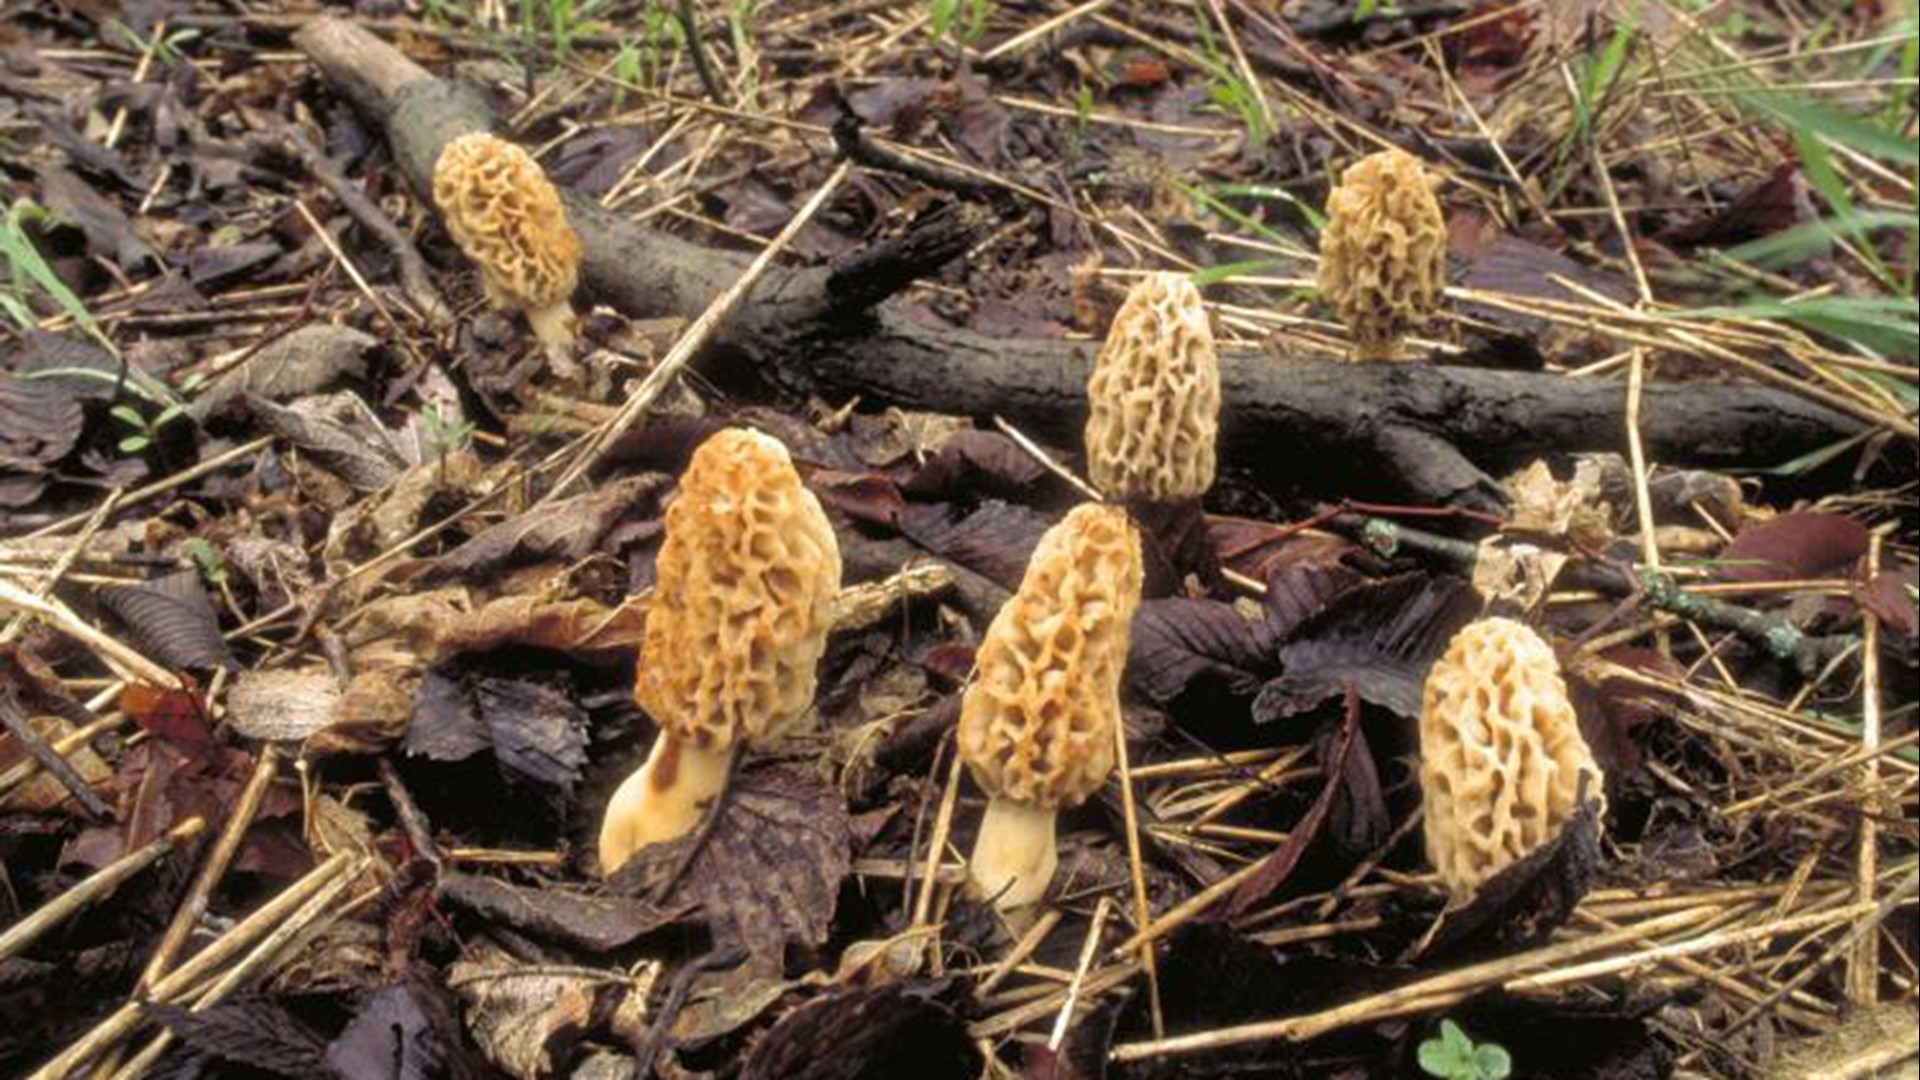 A specific—and sometimes valuable—fungi is blooming in the Ozarks, bringing morel mushroom hunters out of the woodwork.